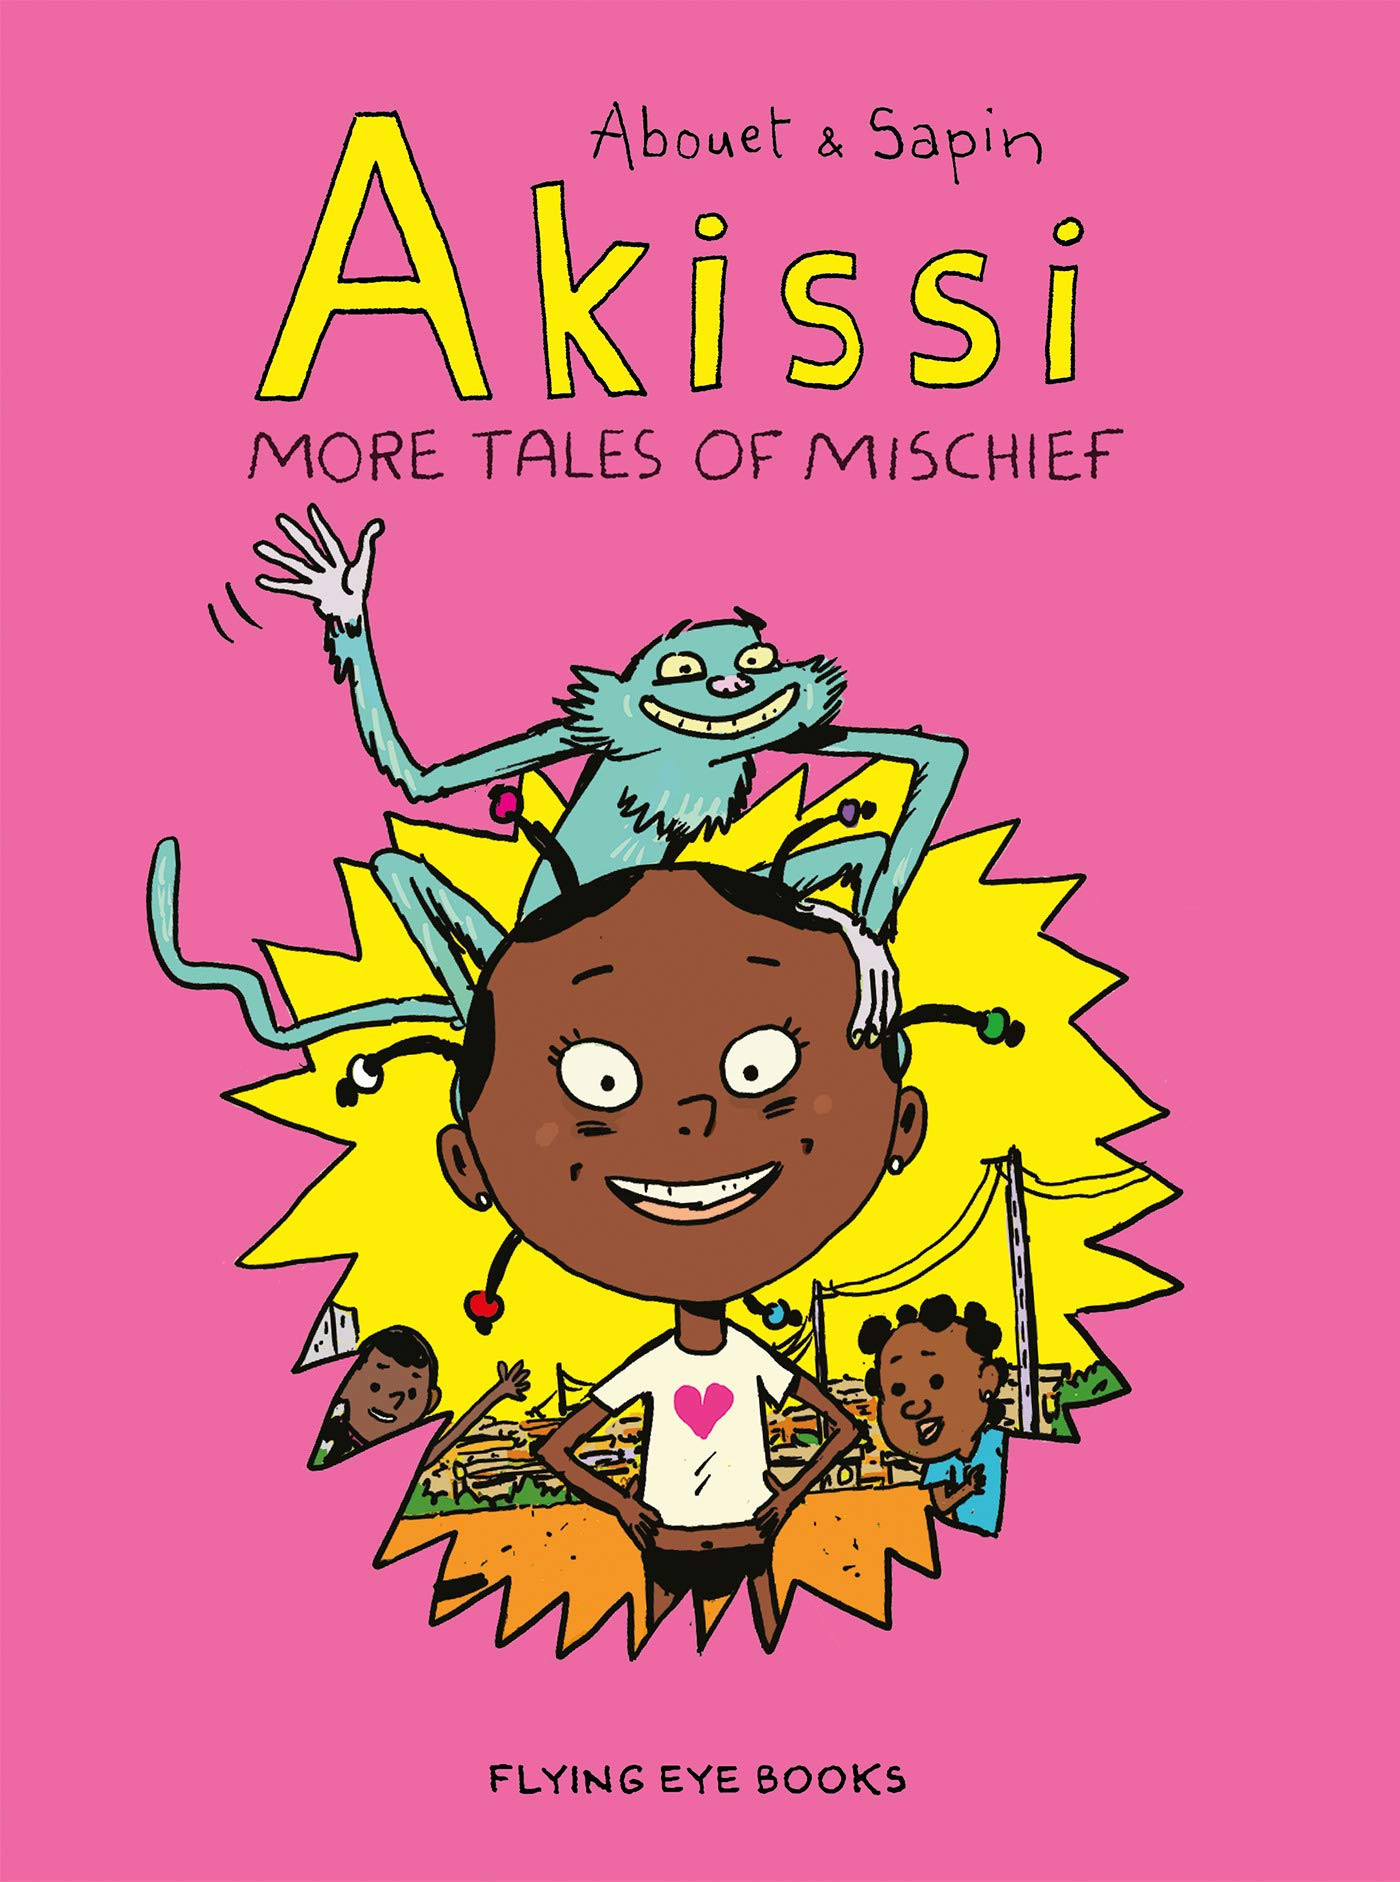 Akissi - More Tales of Mischief